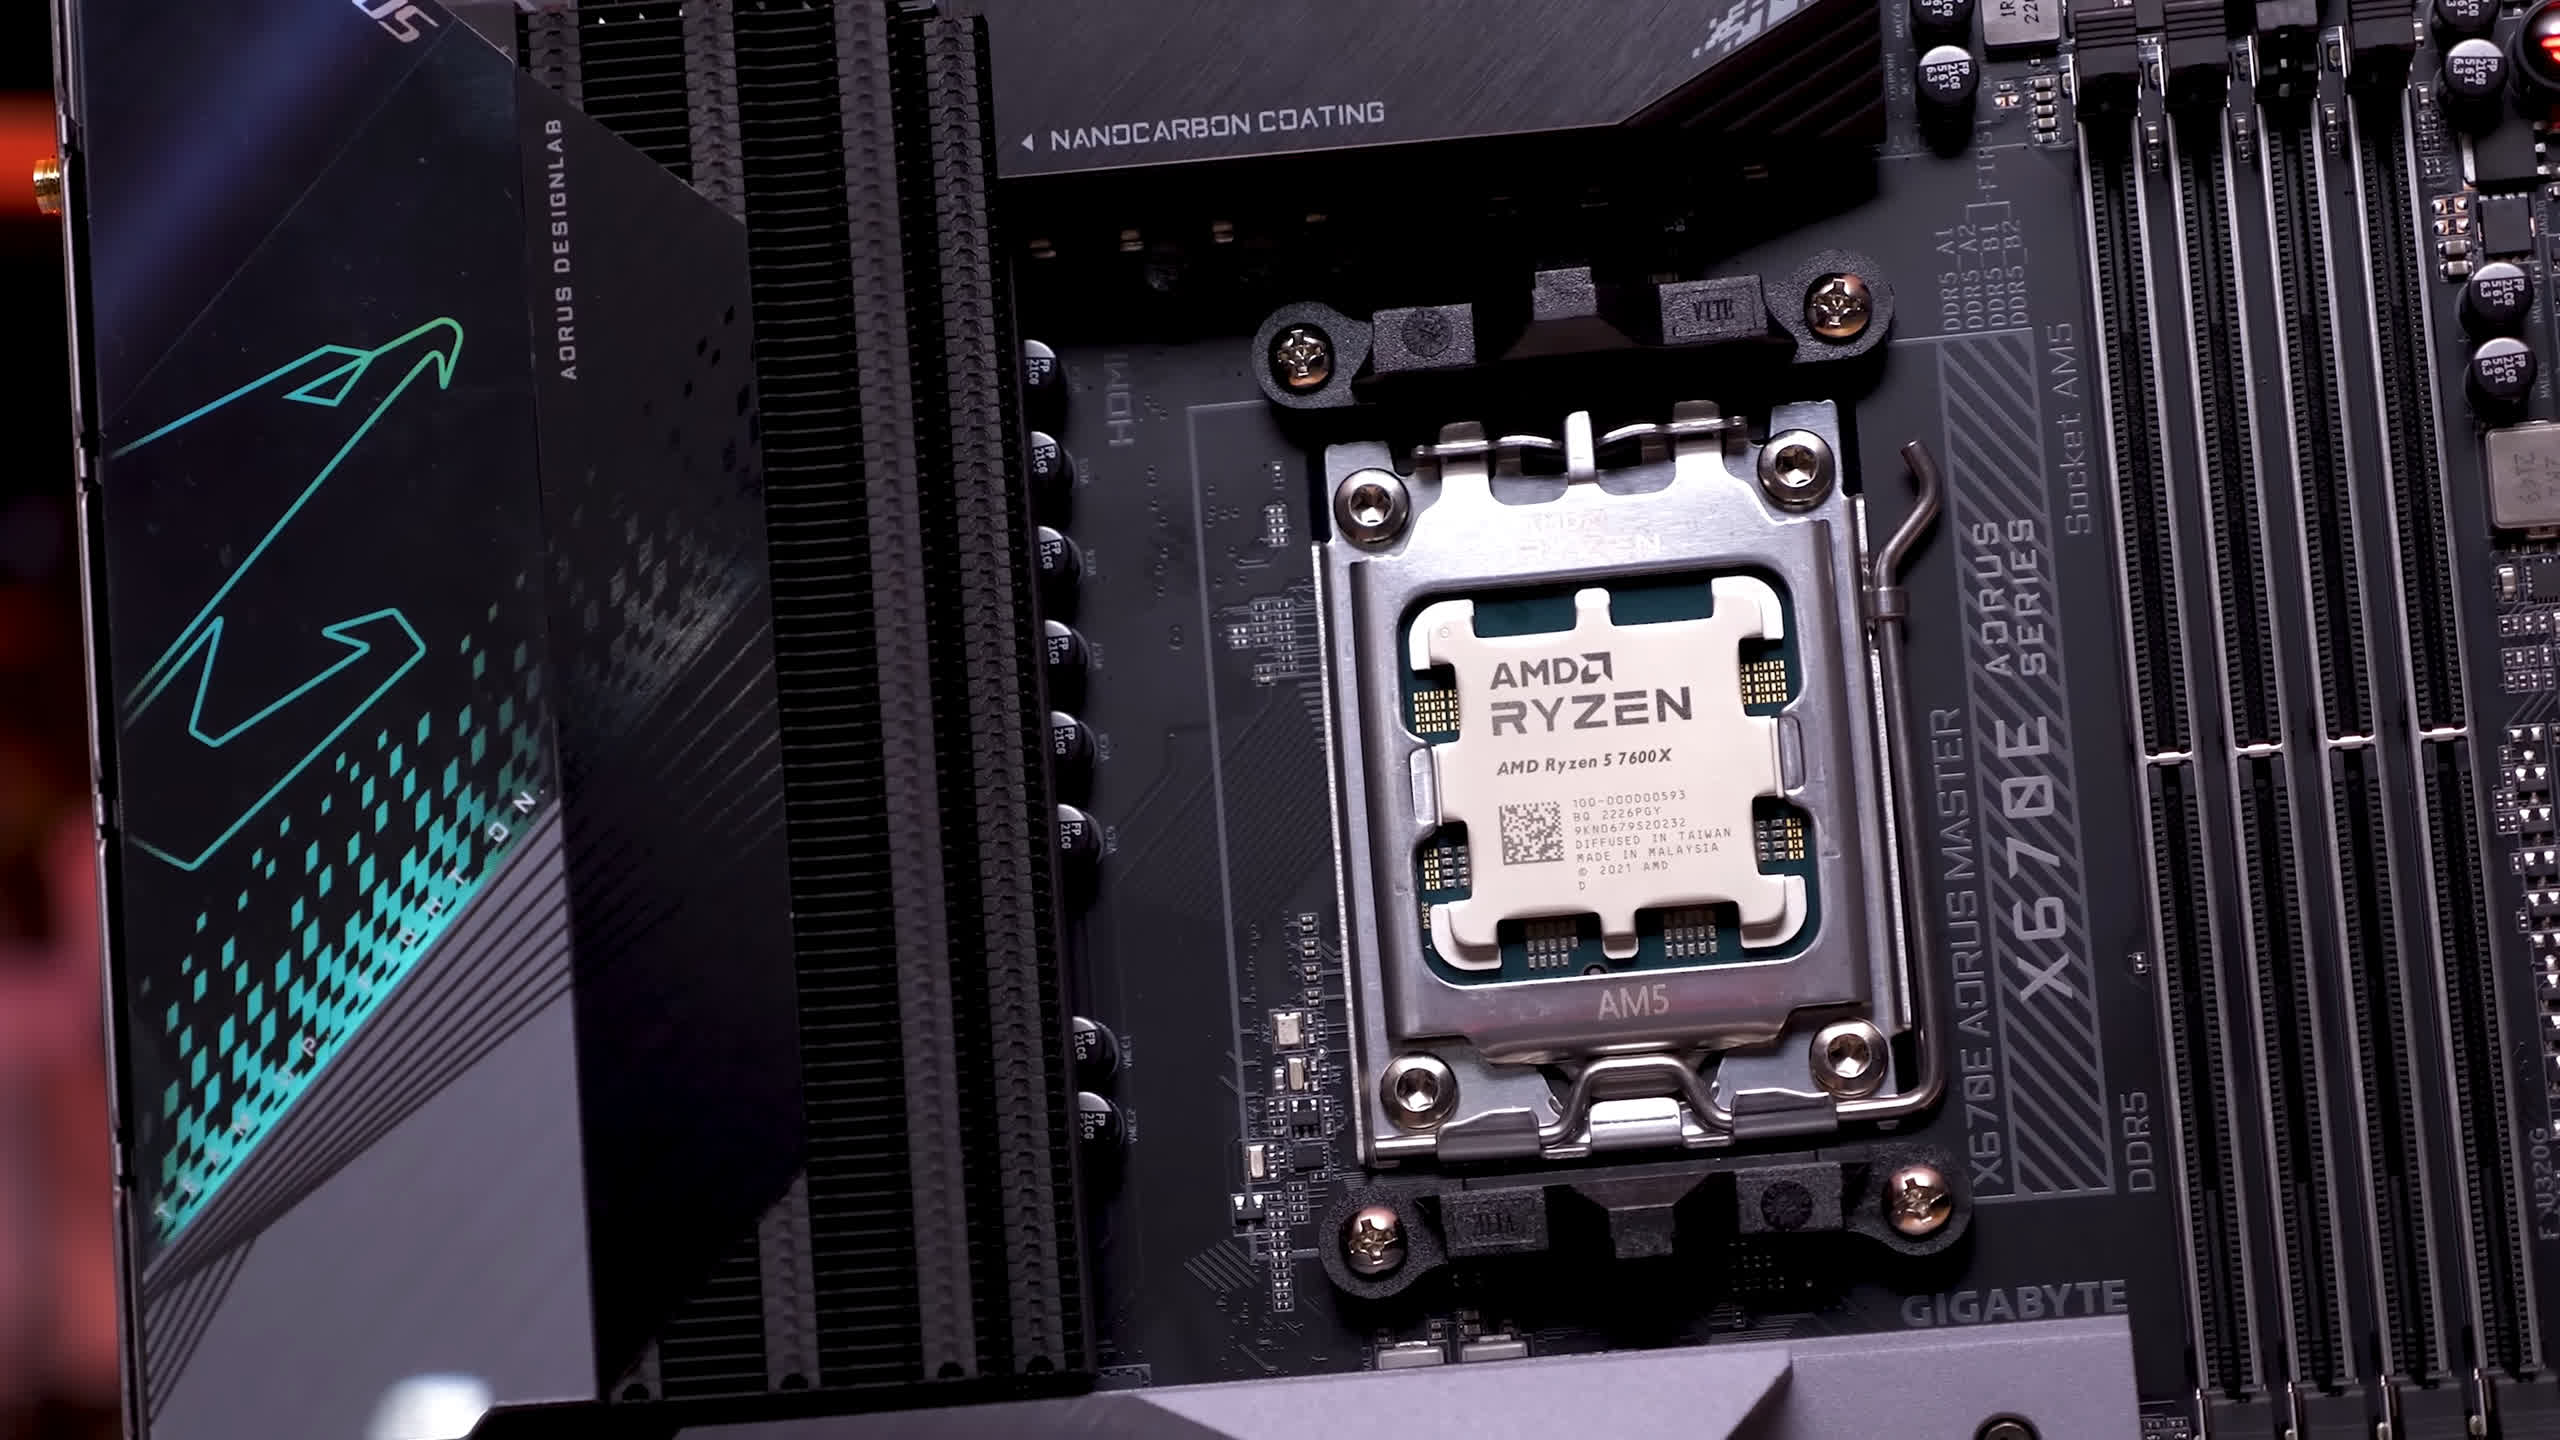 CPU shipments suffer biggest decline in 30 years, for the second time in the last year